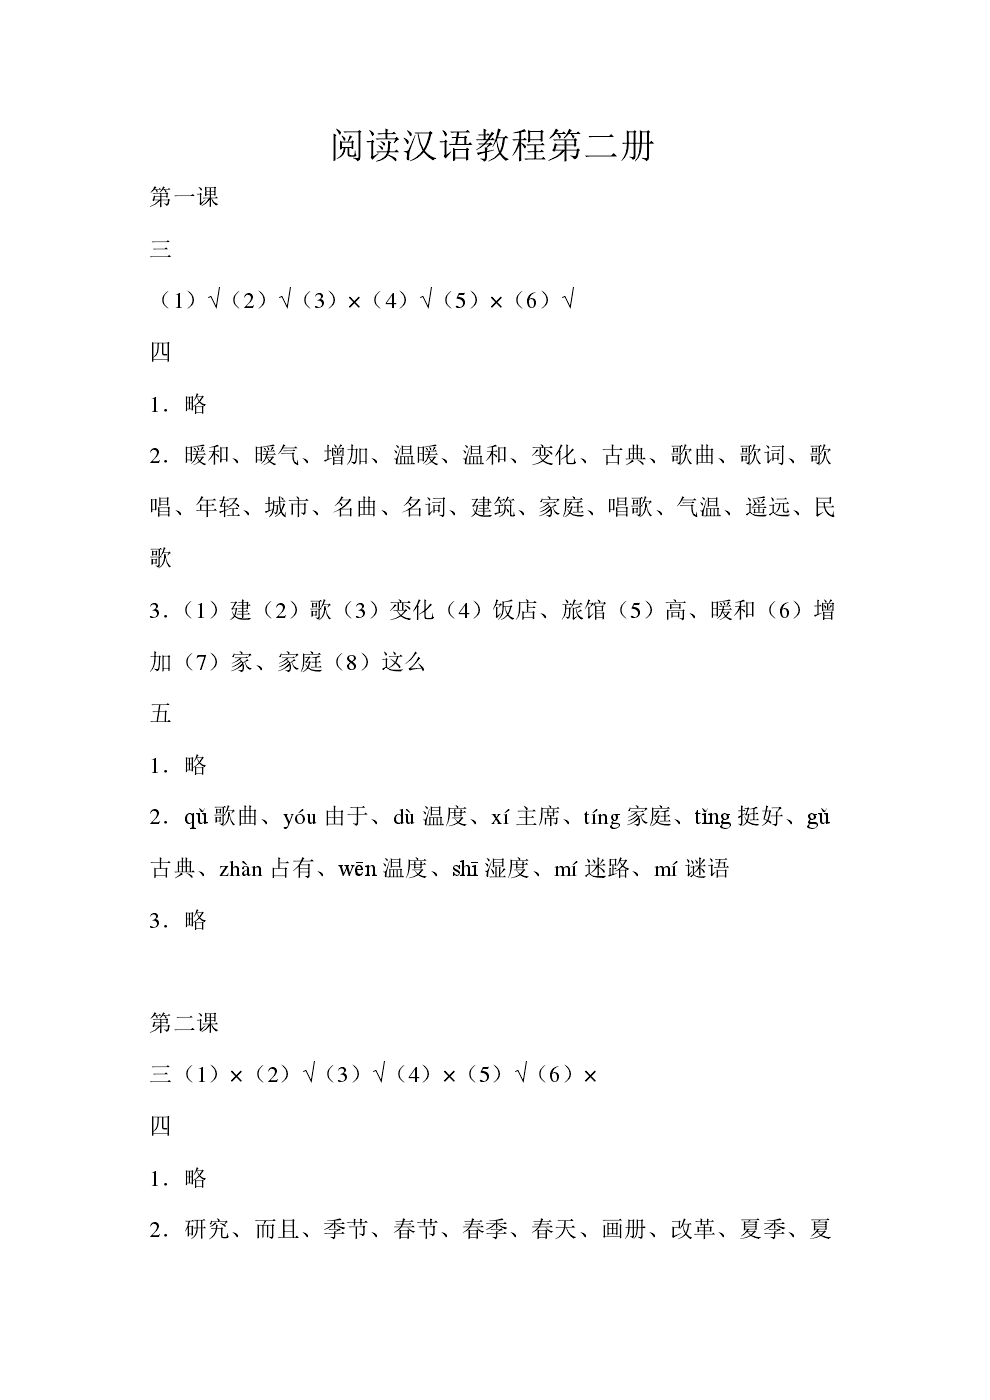 Reading Chinese Course 2 (reference answer)